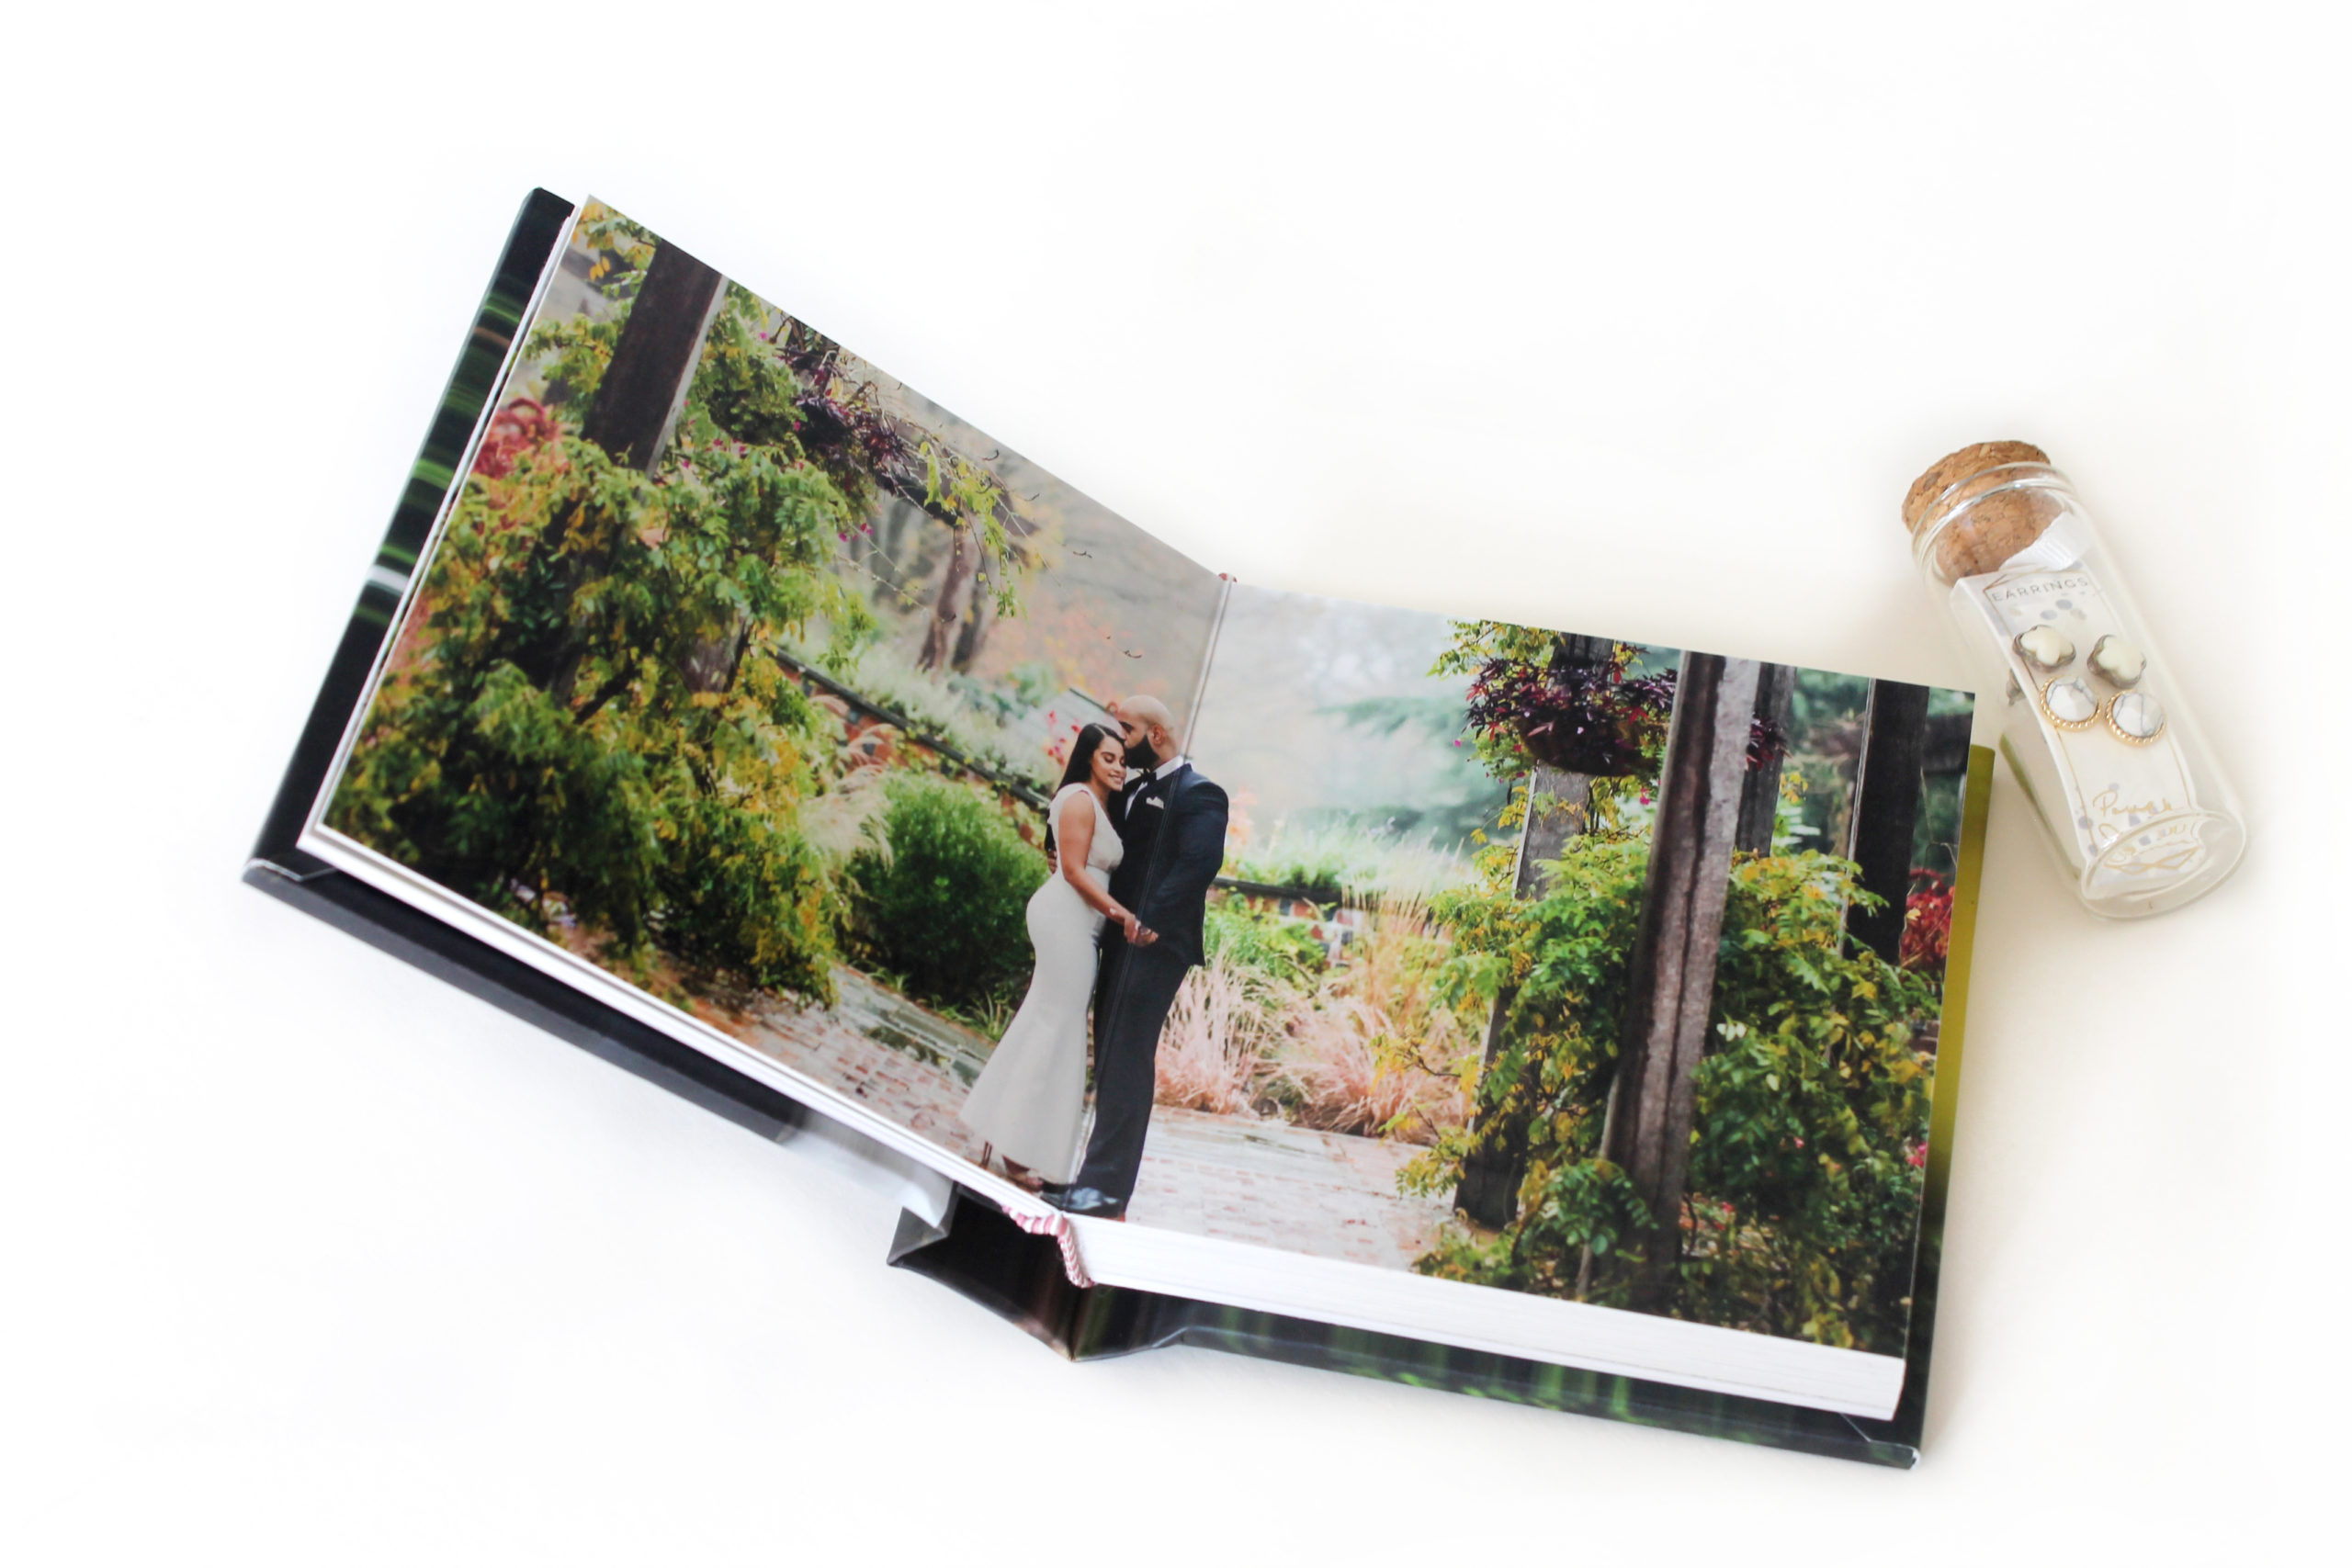 Close-up of Albums Remembered Little Hugs album with a wedding couple kissing in a garden